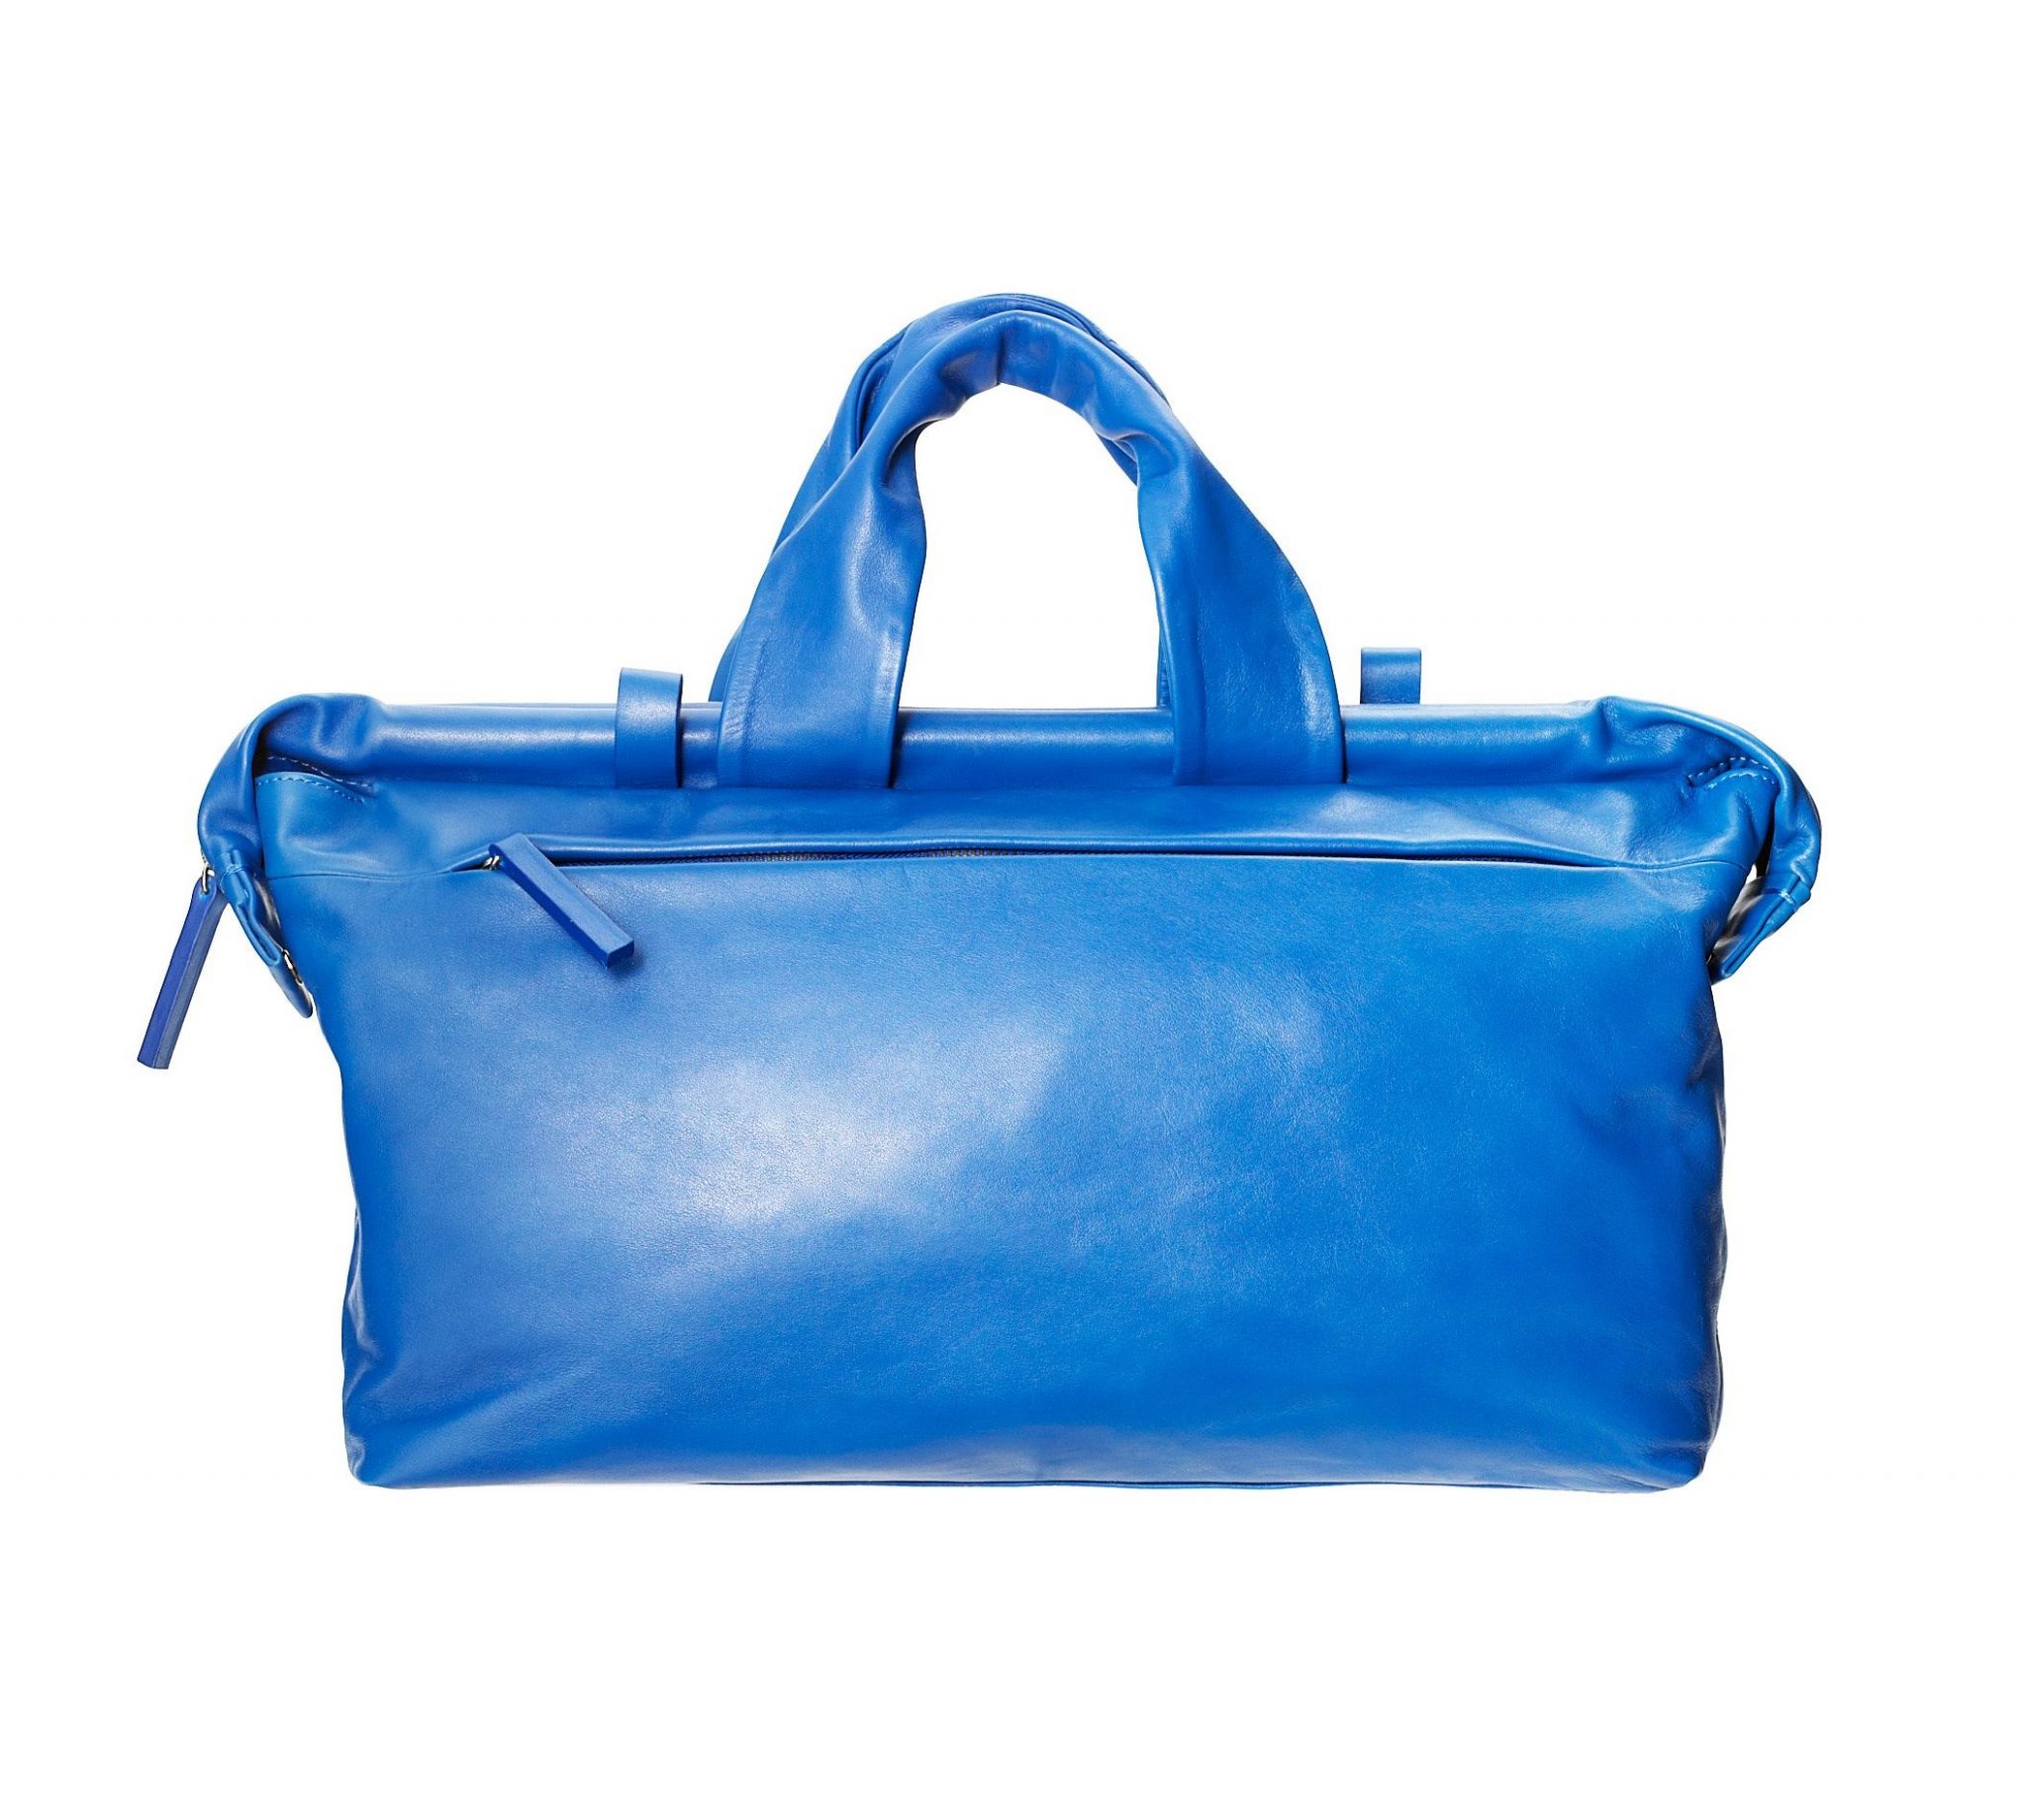 Leather Bag  $169.99  Compare at $300